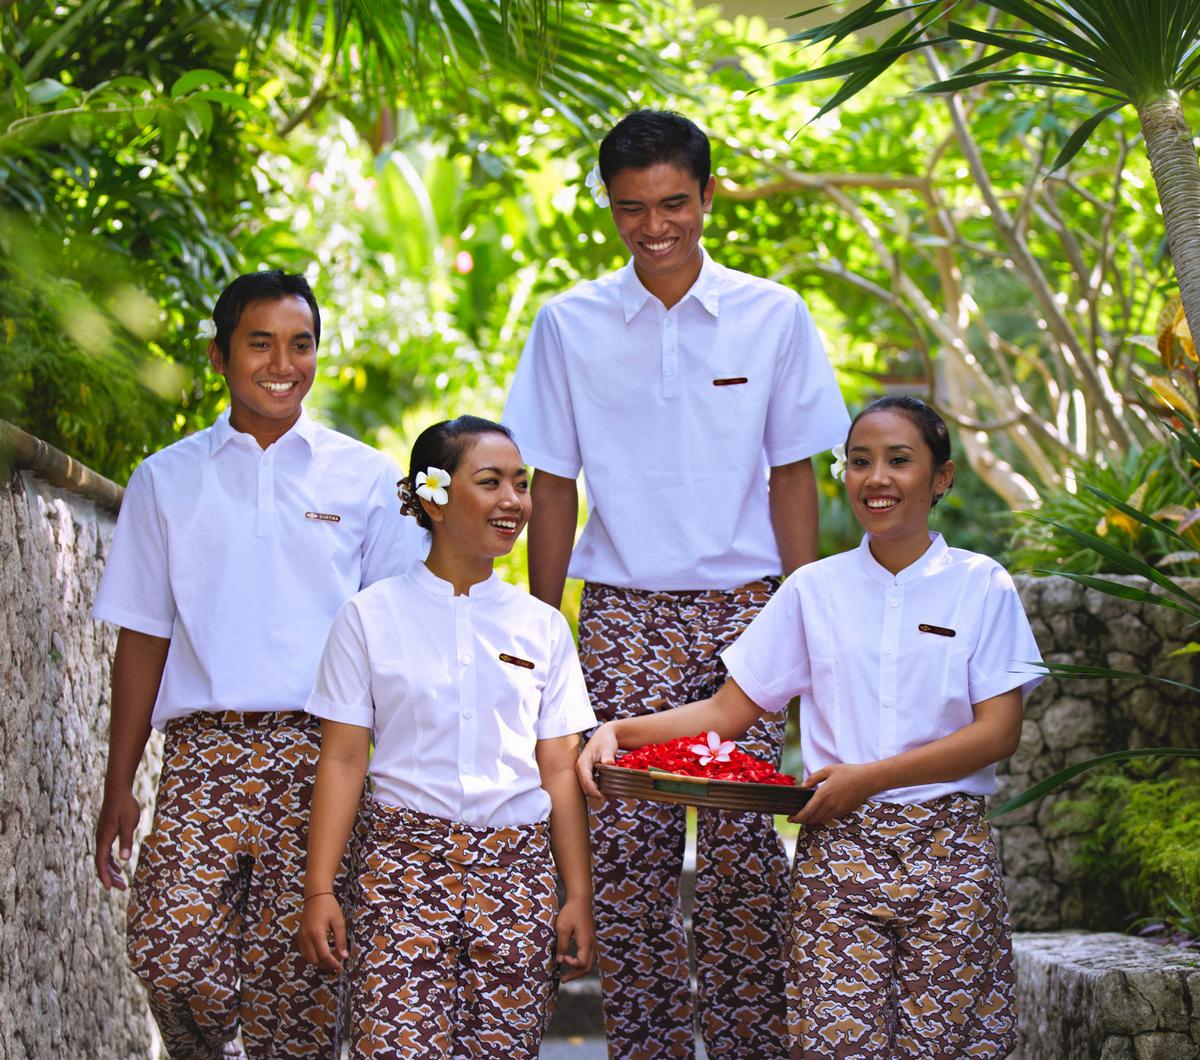 Mandara spa celebrates 20 years with special programmes for Uniform spa bali